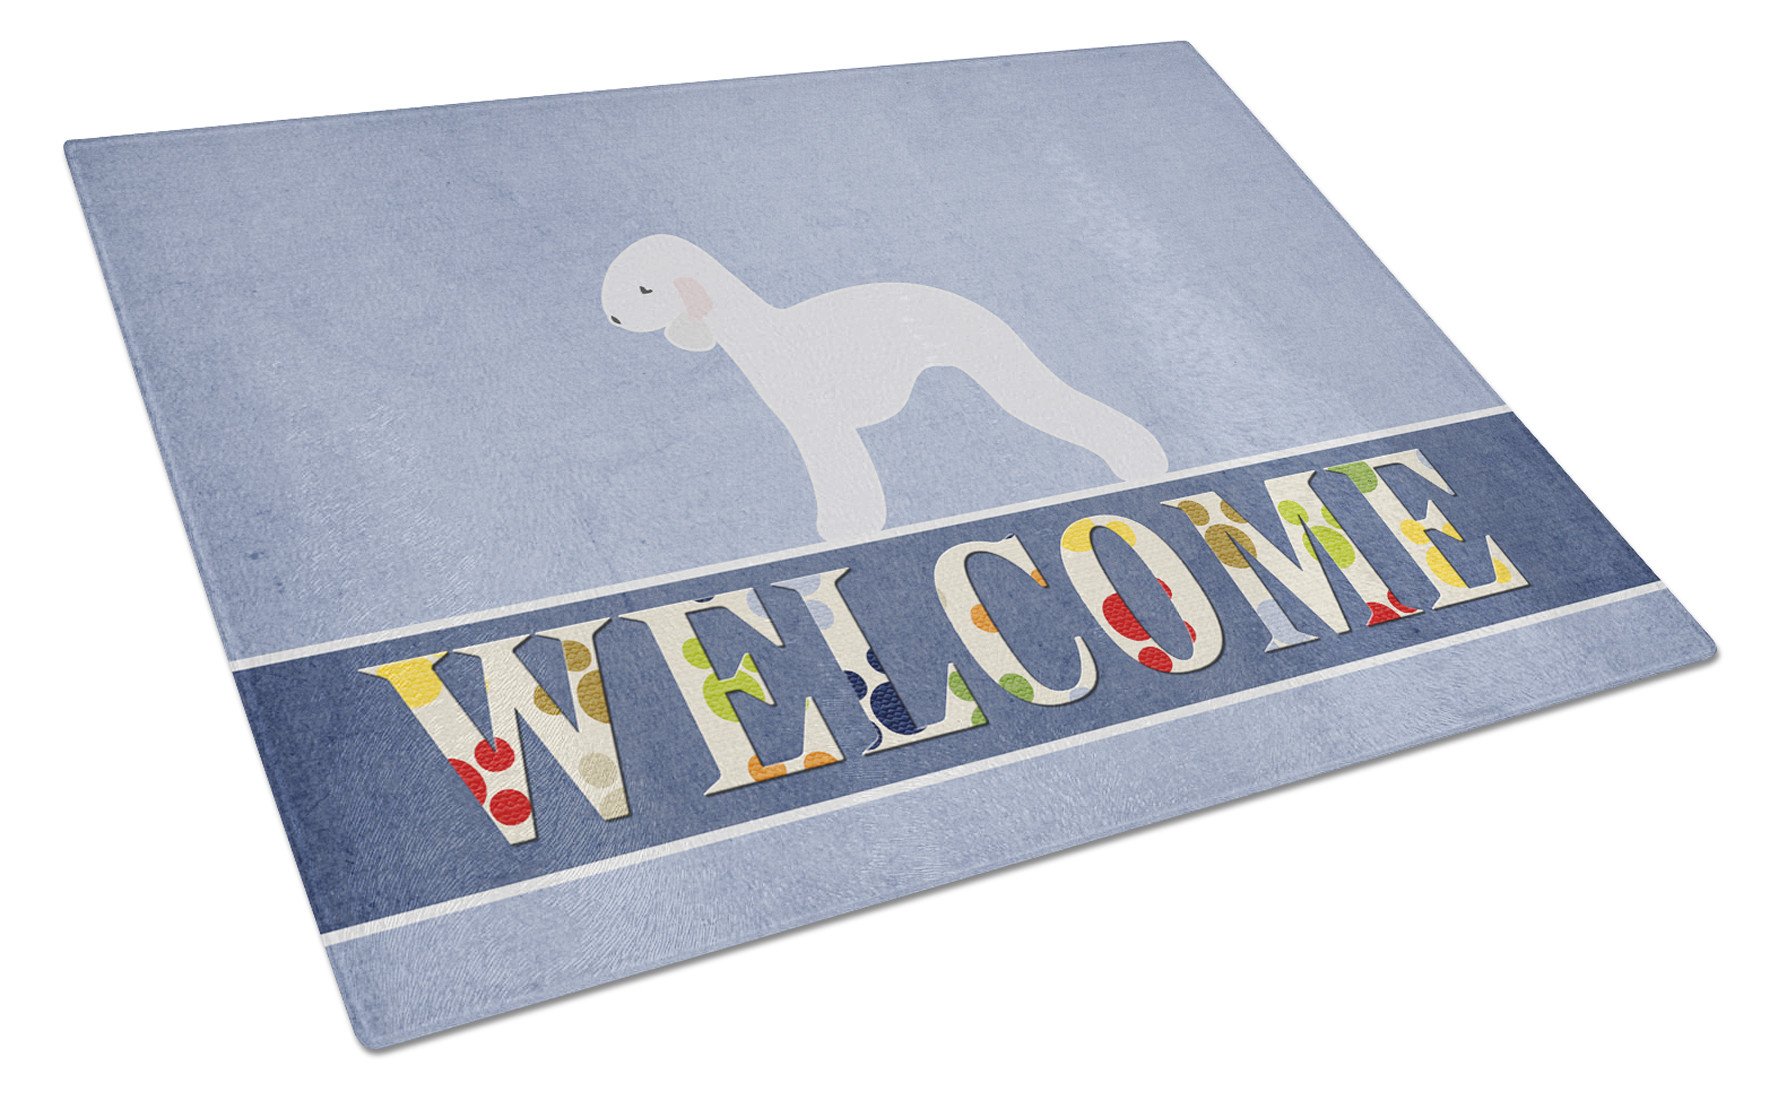 Bedlington Terrier Welcome Glass Cutting Board Large BB5498LCB by Caroline's Treasures